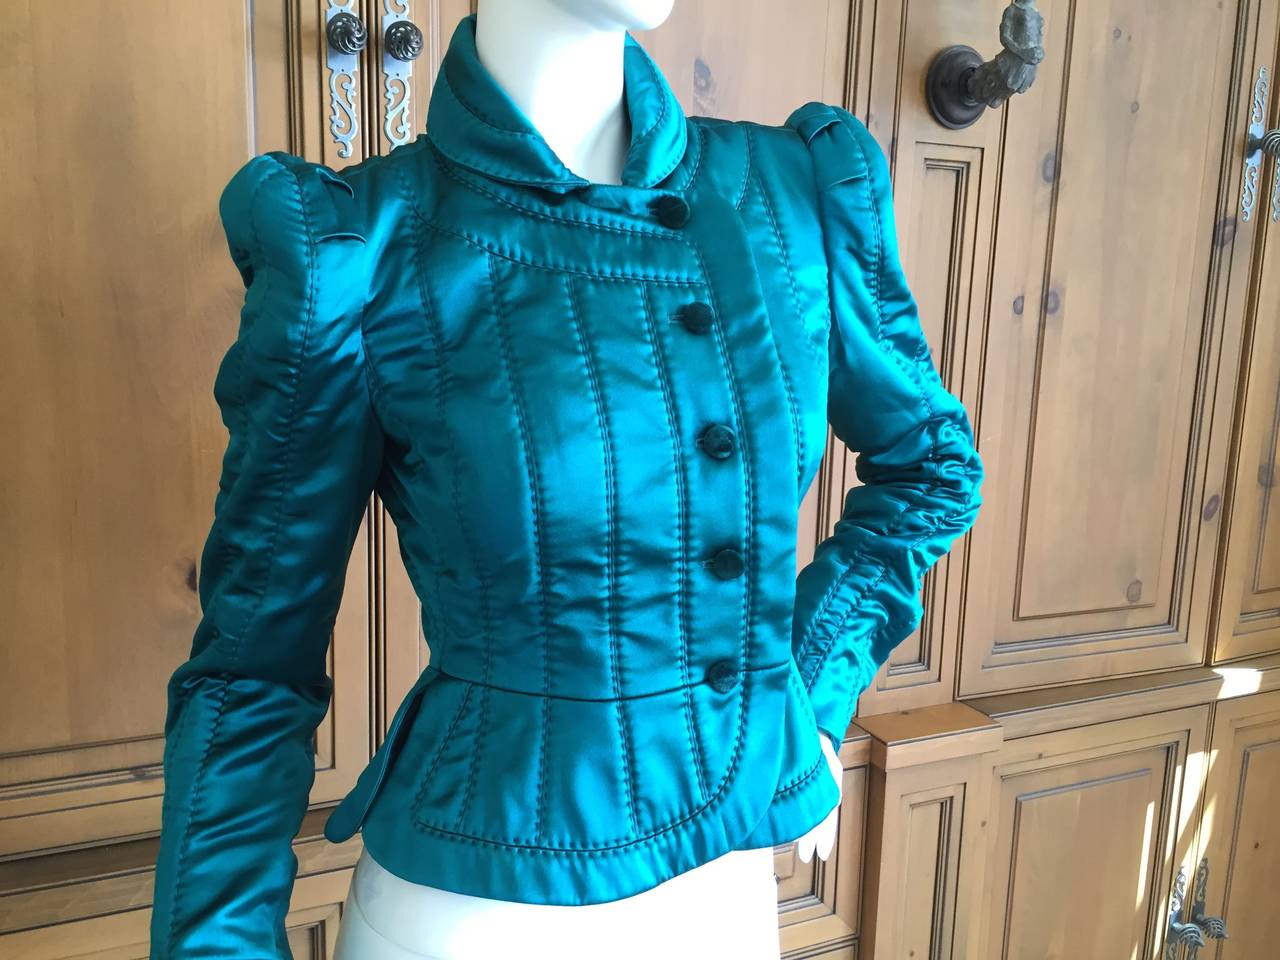 Yves Saint Laurent Tom Ford Fall 2002 Pagoda Shoulder Jacket 

Peacock Green Silk

Jacket is marked sz 36

BUST:	36